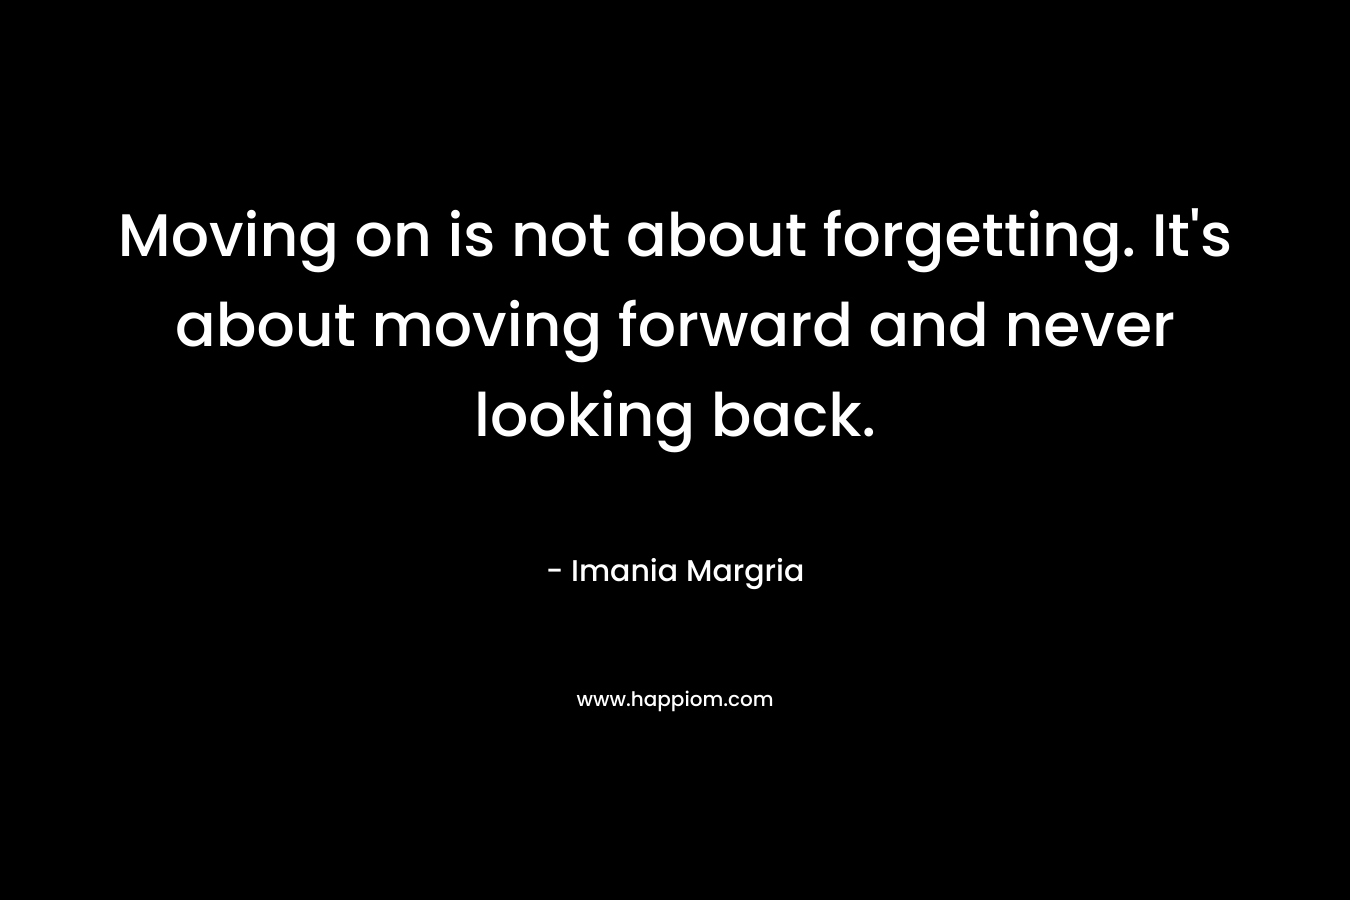 Moving on is not about forgetting. It's about moving forward and never looking back.